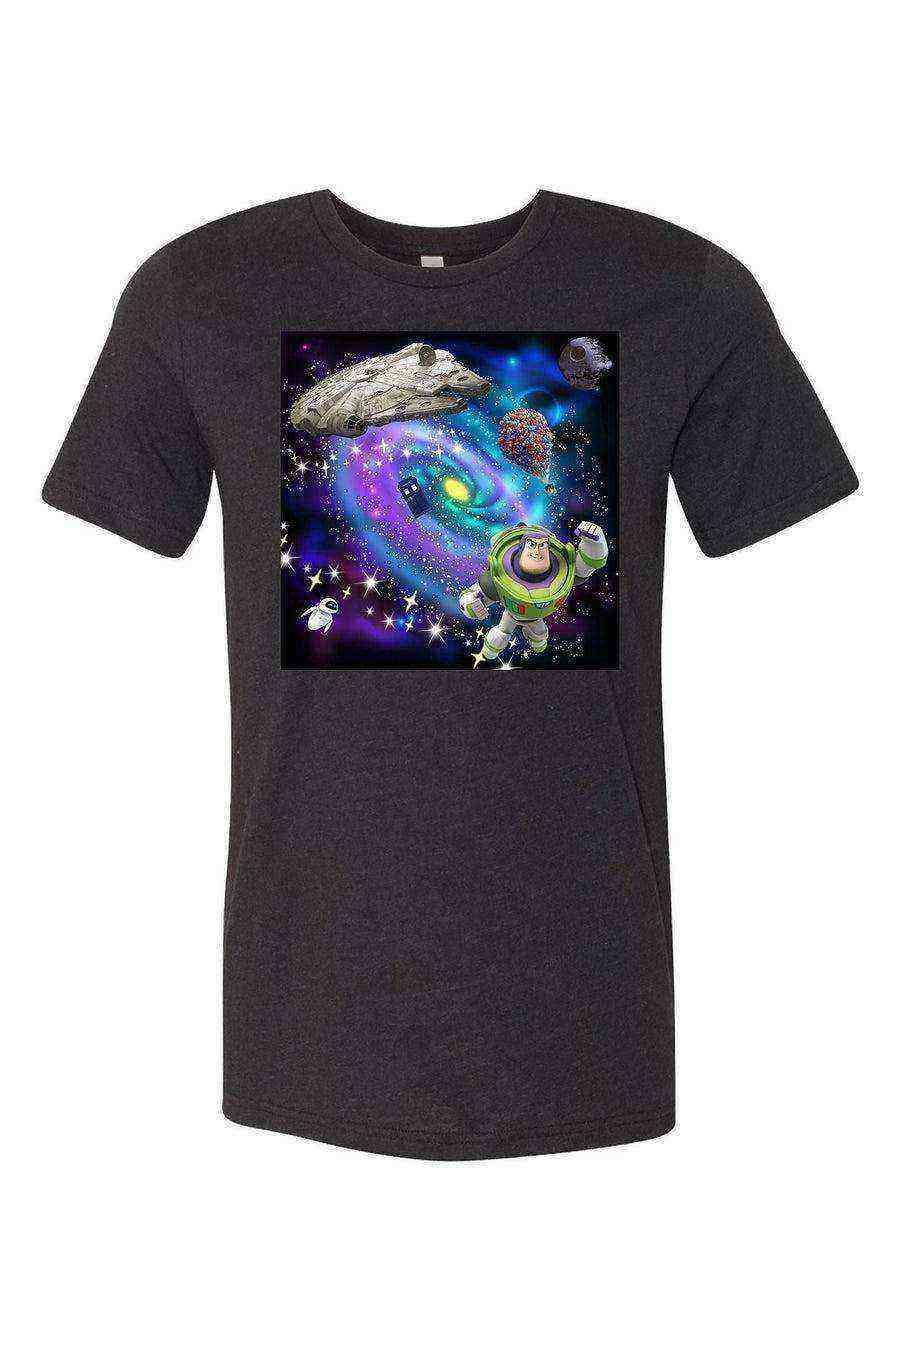 Youth | To Infinity And Beyond Shirt | Outer Space Shirt - Dylan's Tees